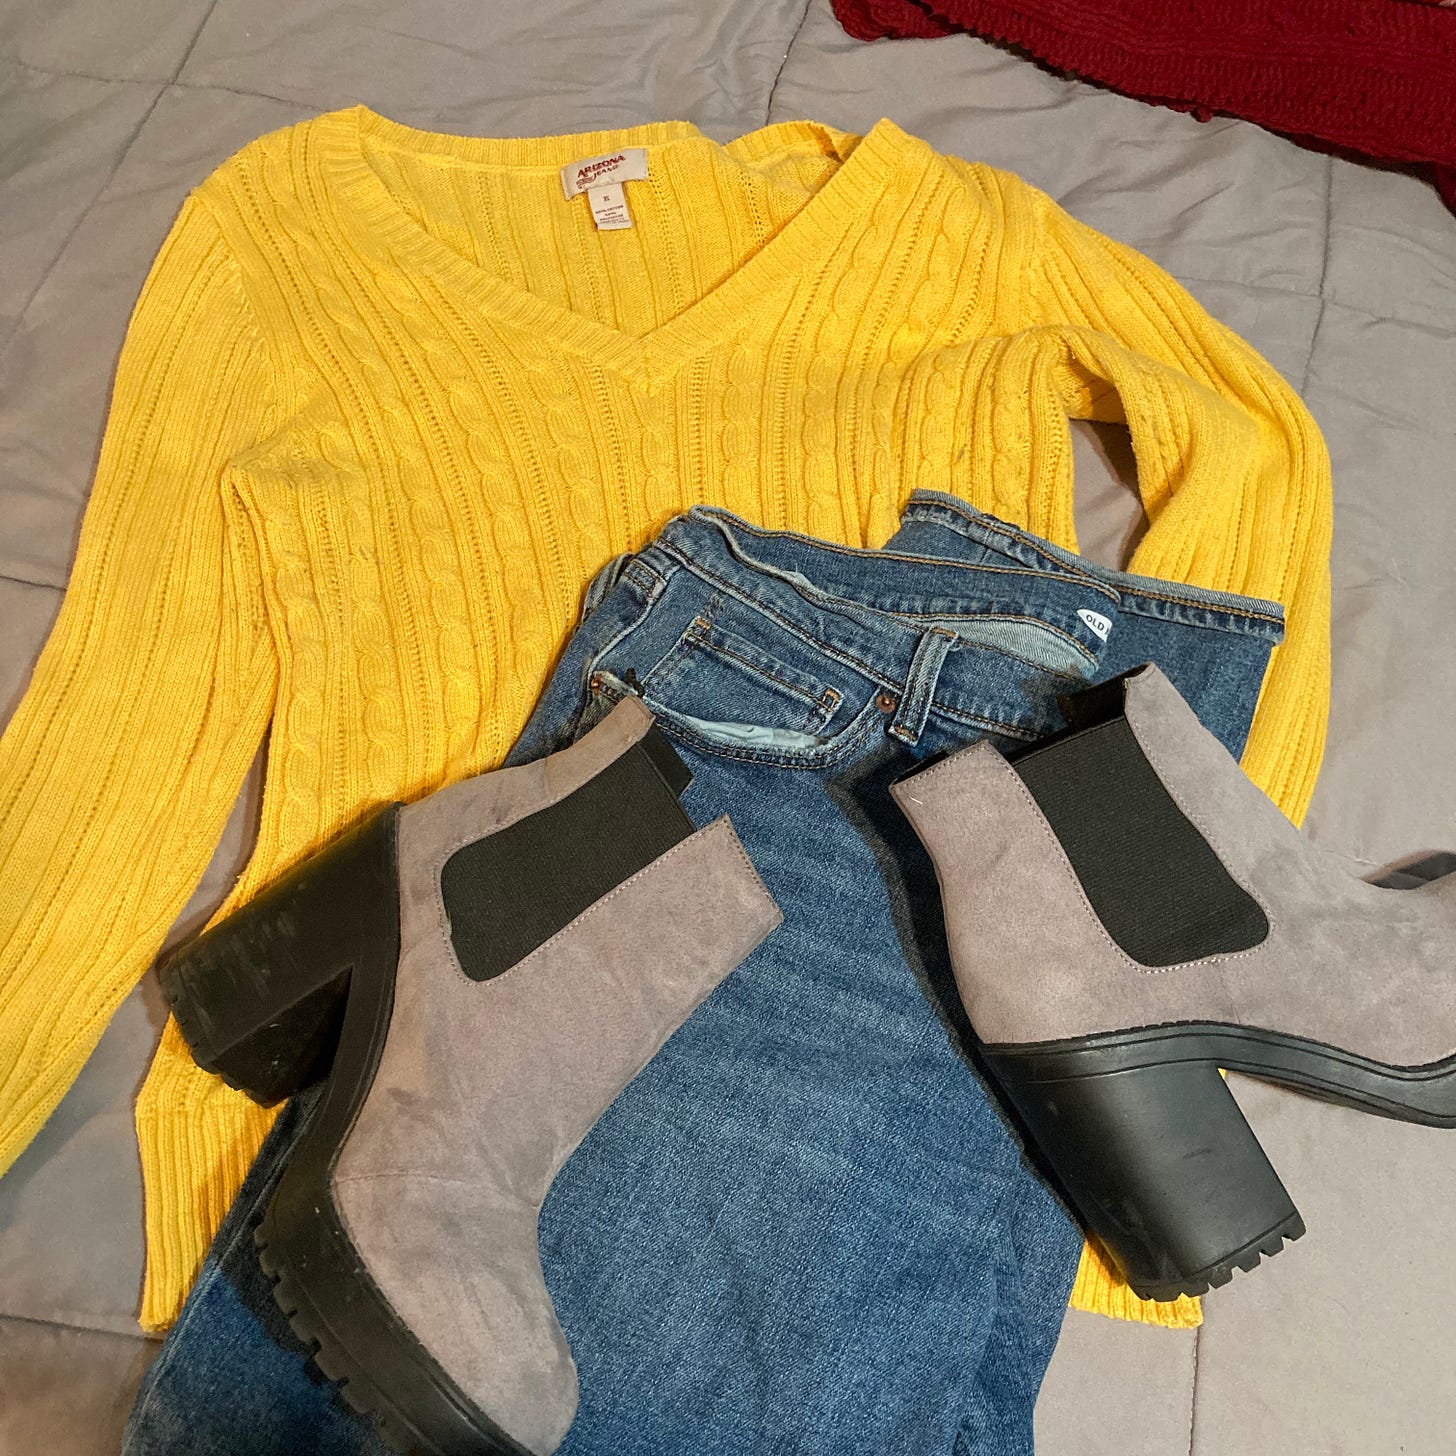 Description: A yellow V-neck sweater, topped by a folded pair of blue jeans, topped by a pair of gray suede platform boots laying on their side are spread out on a gray quilted bedspread.